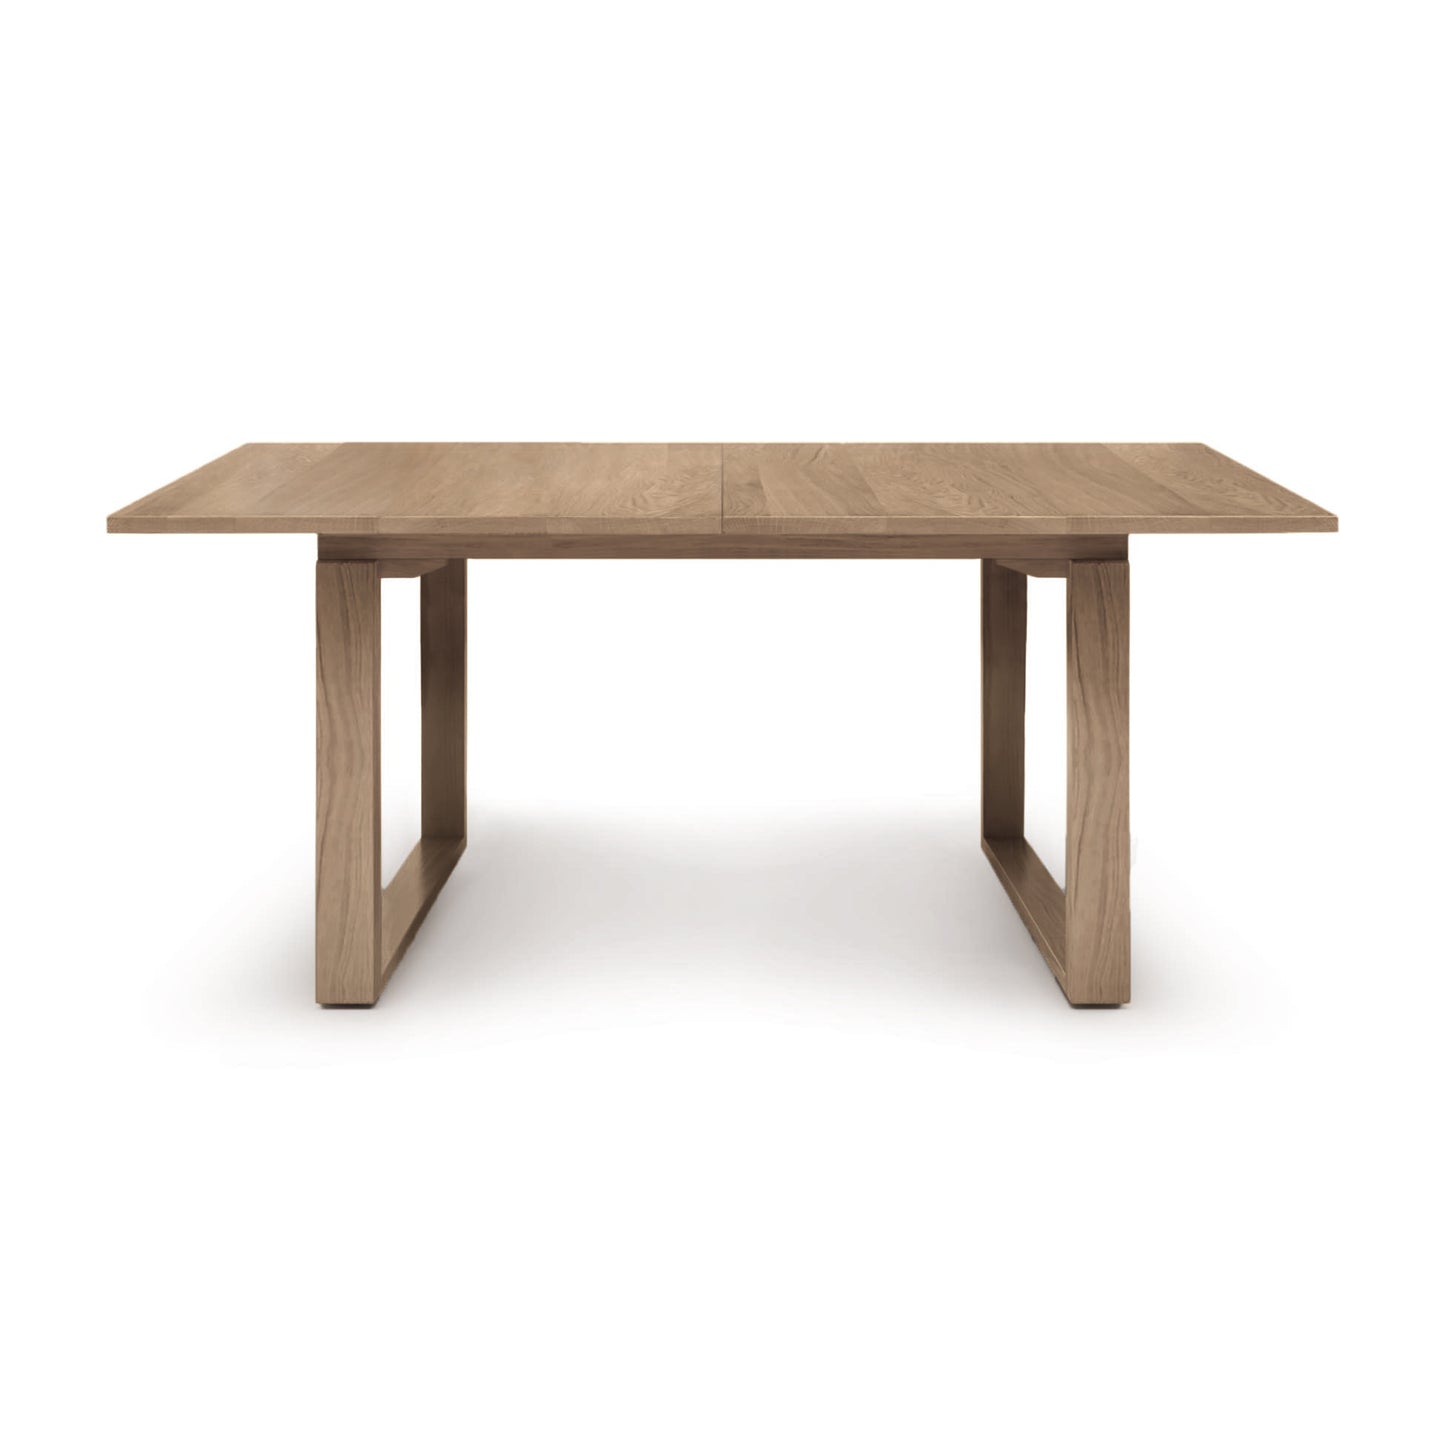 A Copeland Furniture Iso Extension Dining Table with a simple, modern design on a white background.